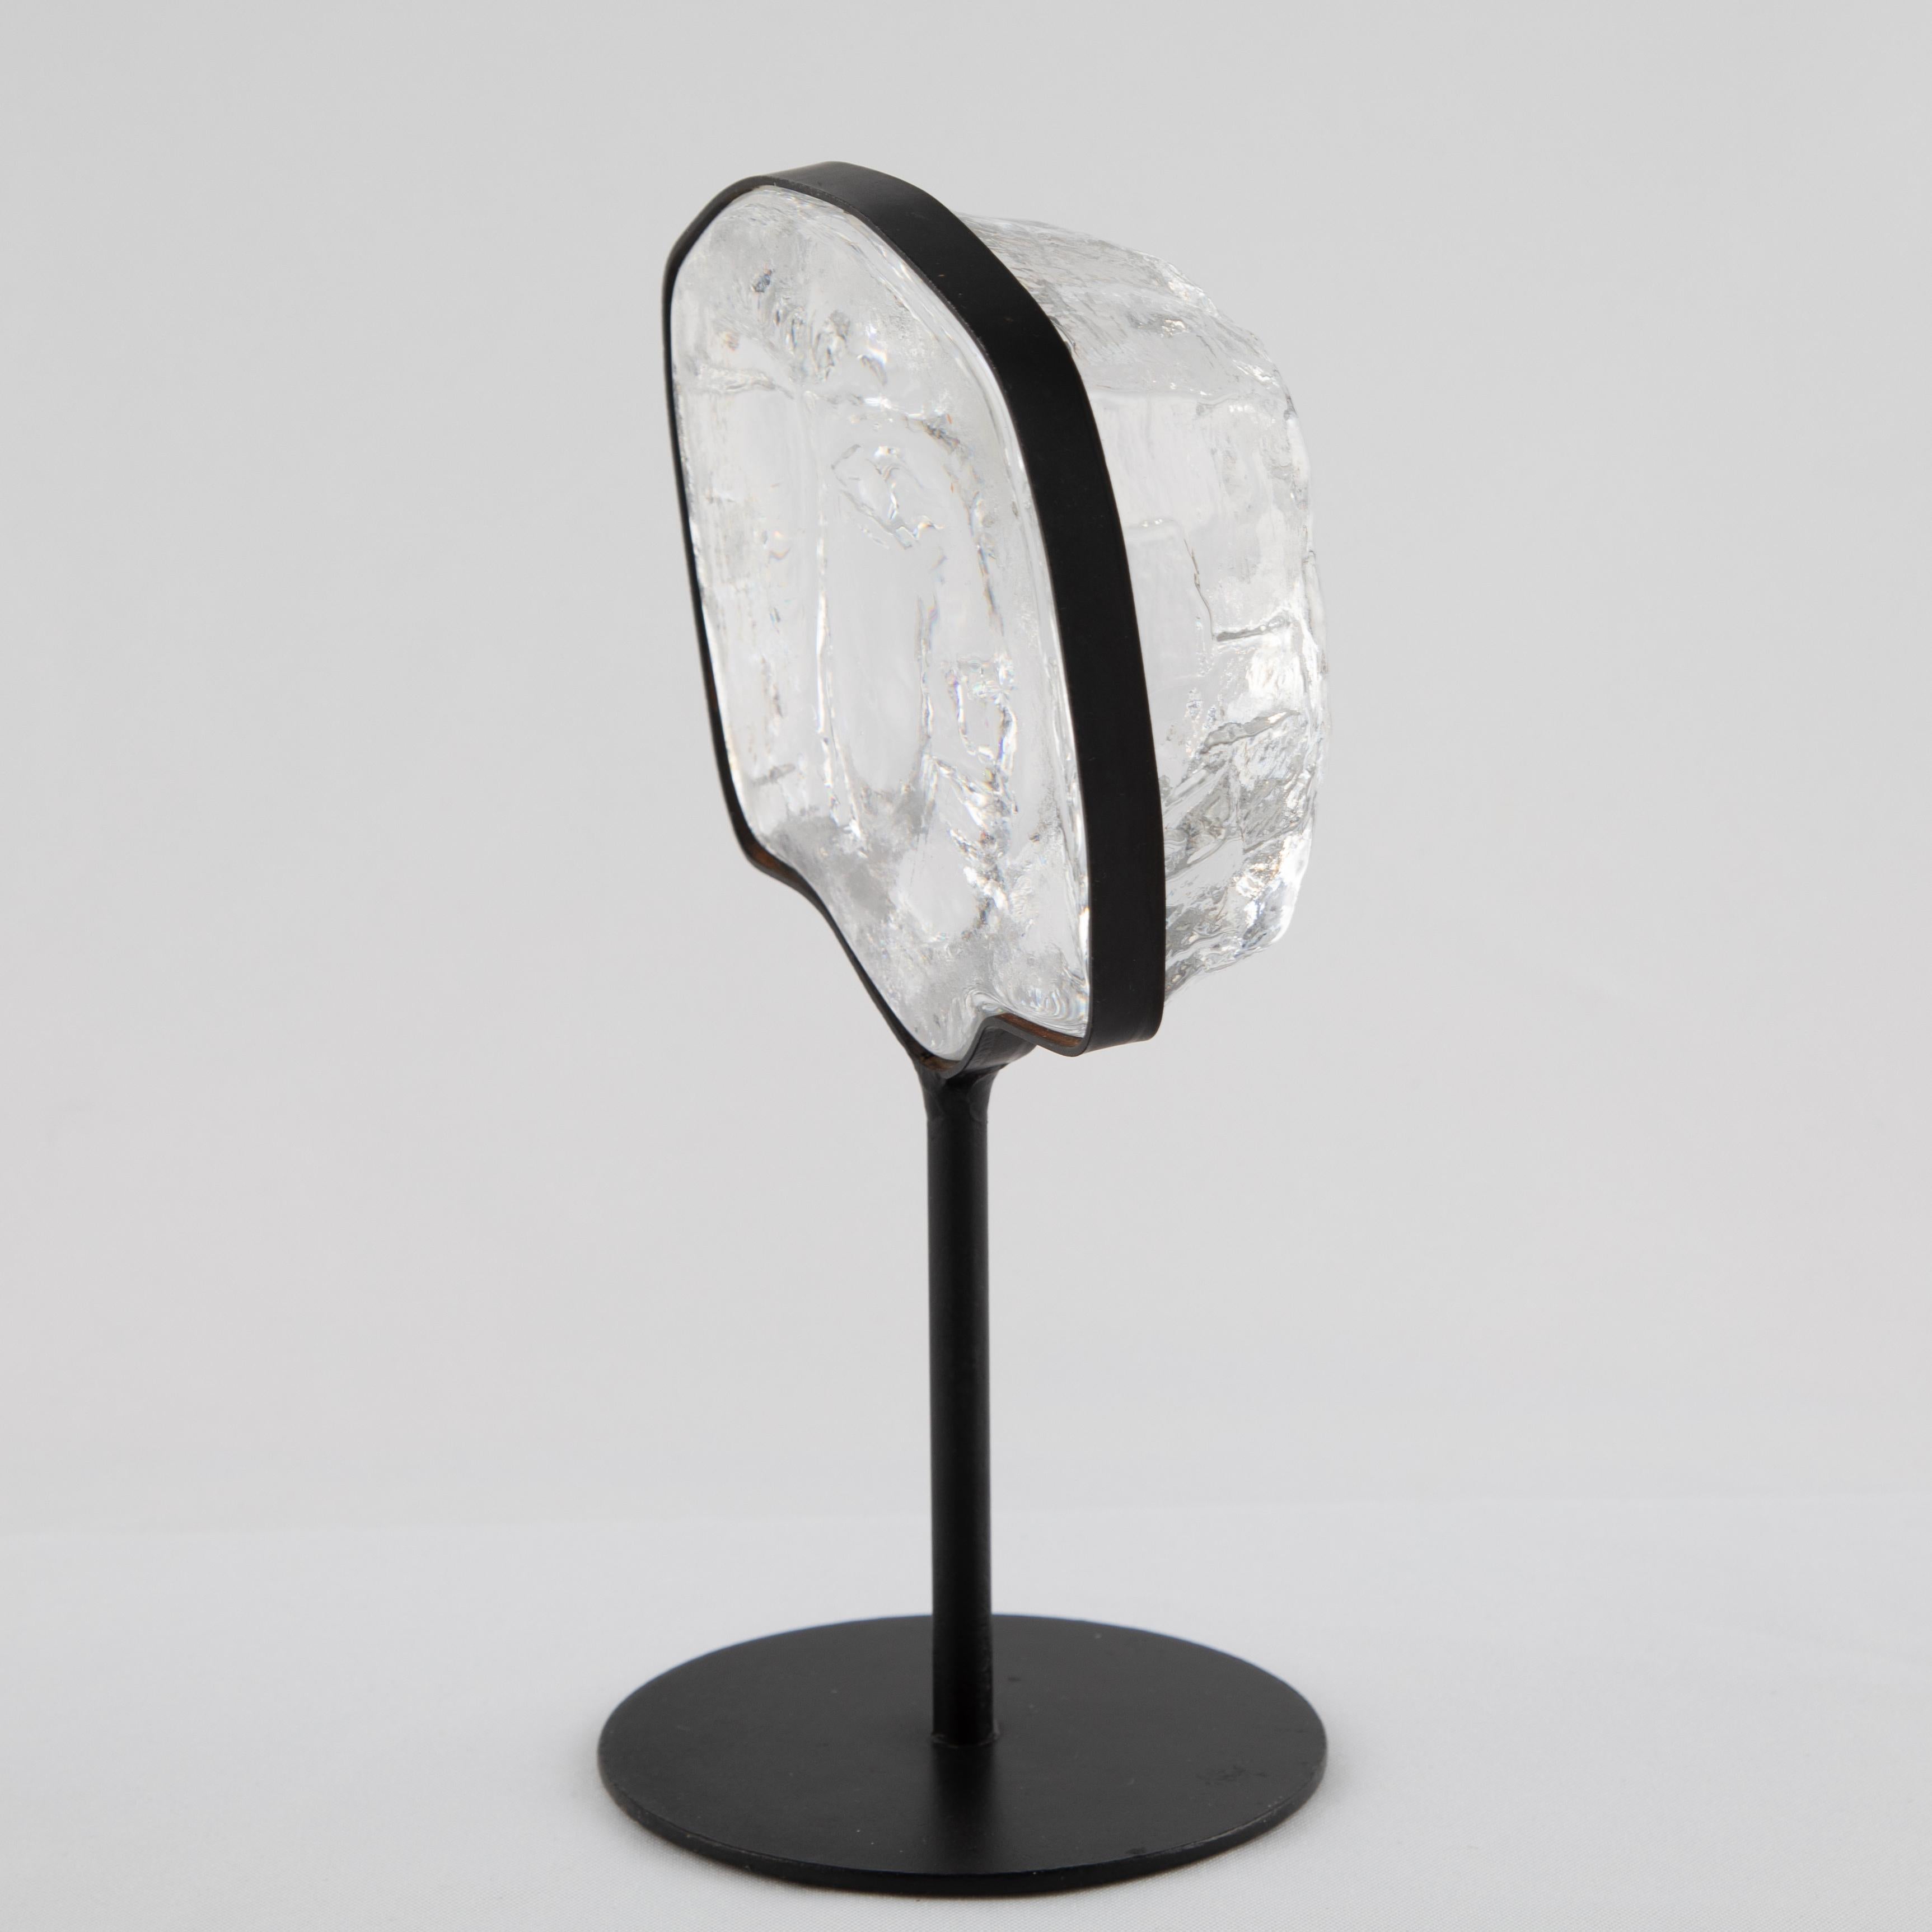 Glass Face Sculpture on Iron Stand by Erik Hoglund for Kosta Boda, circa 1960s For Sale 2